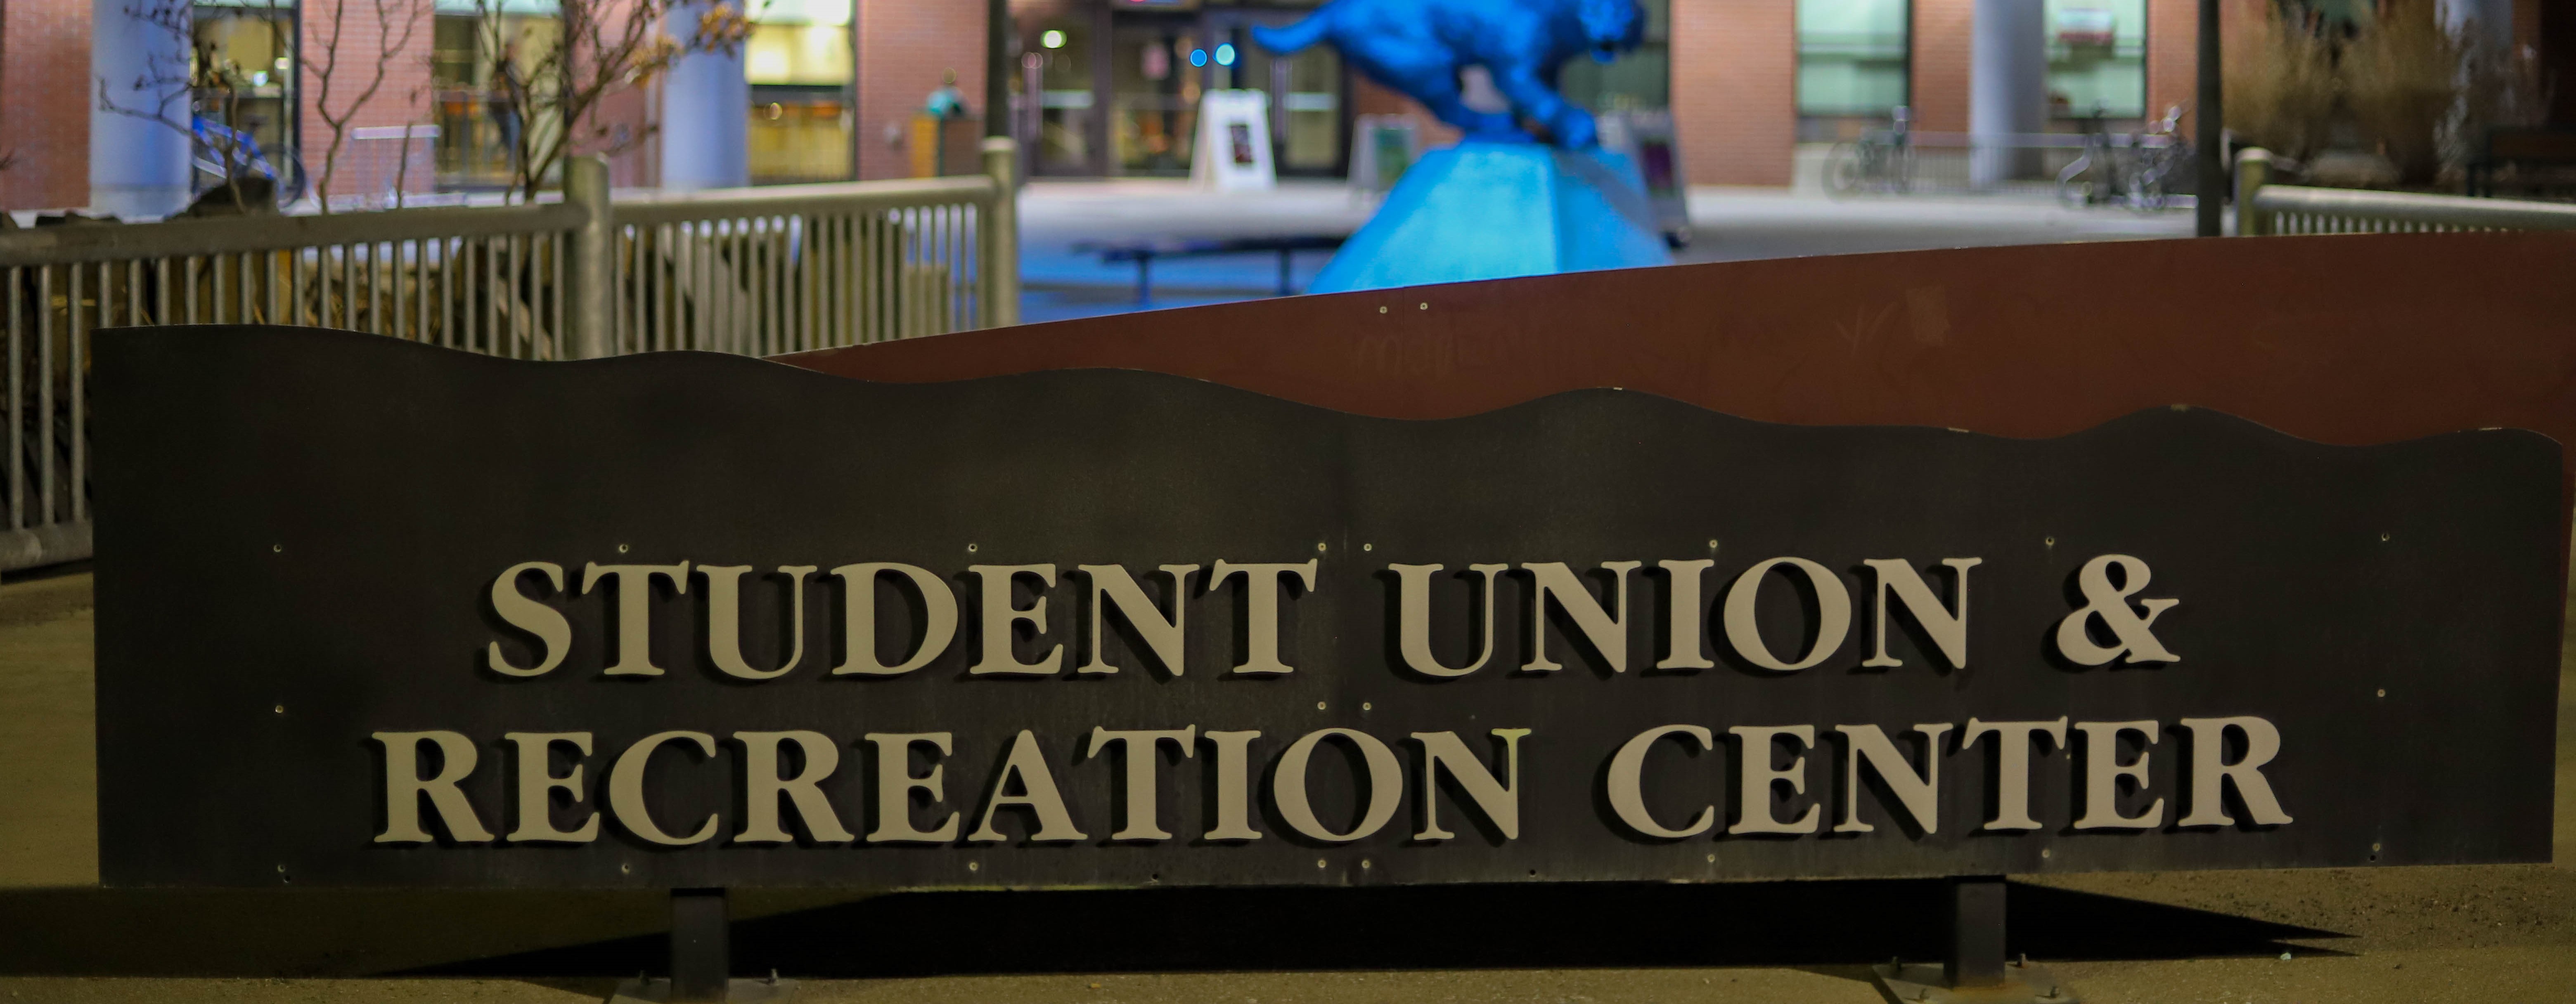 A sign on campus that reads "Student Union & Recreation Center".